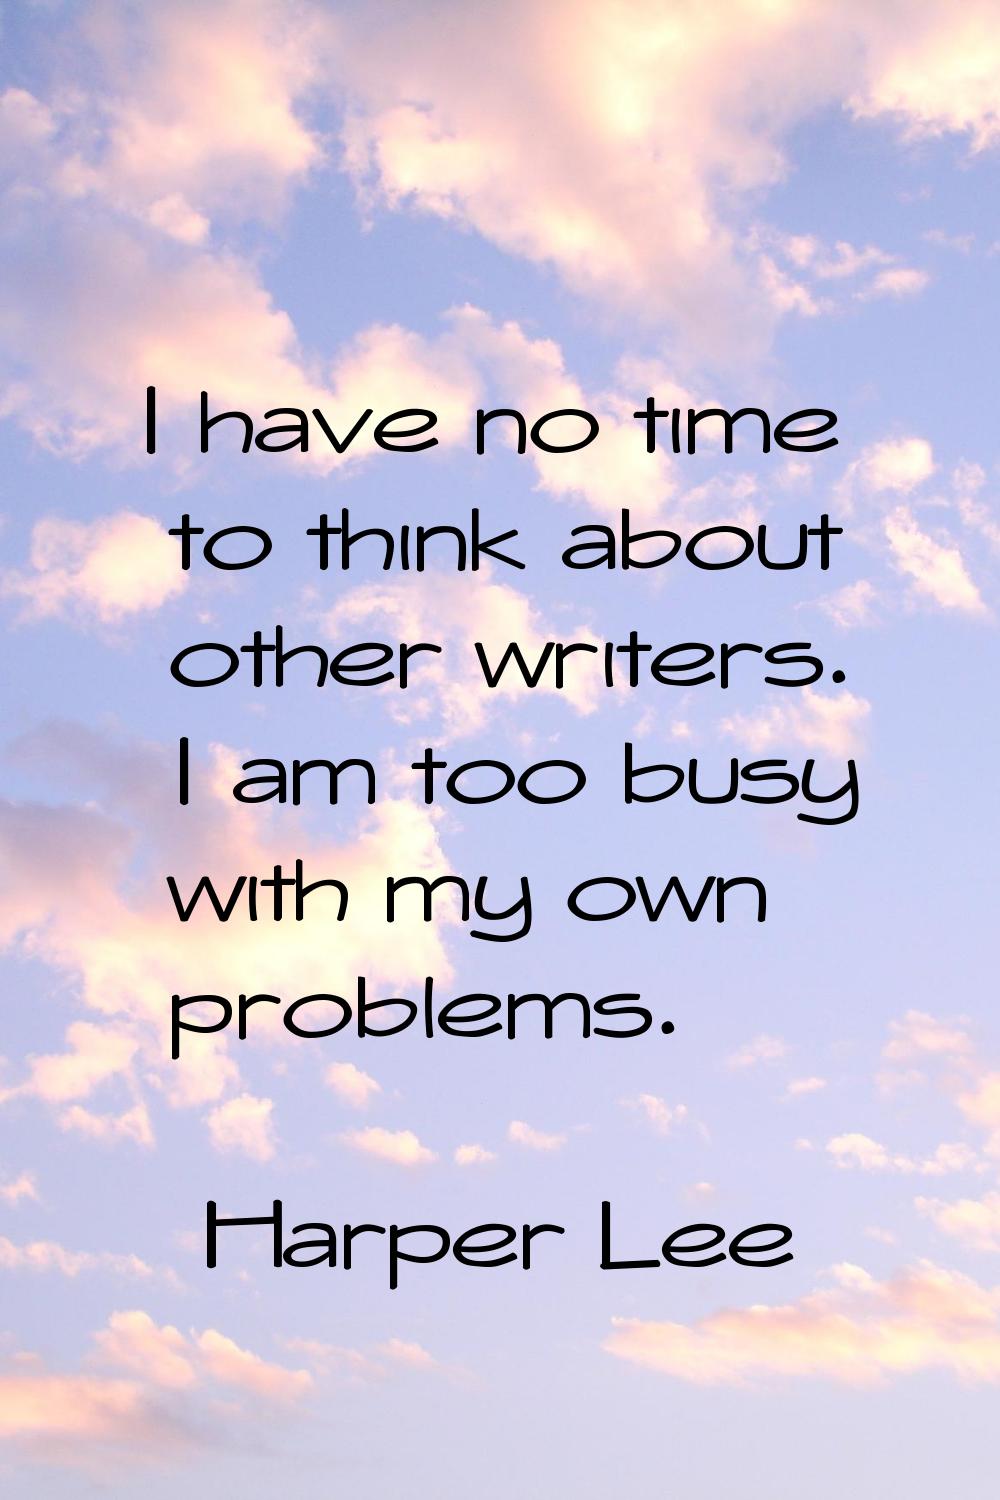 I have no time to think about other writers. I am too busy with my own problems.